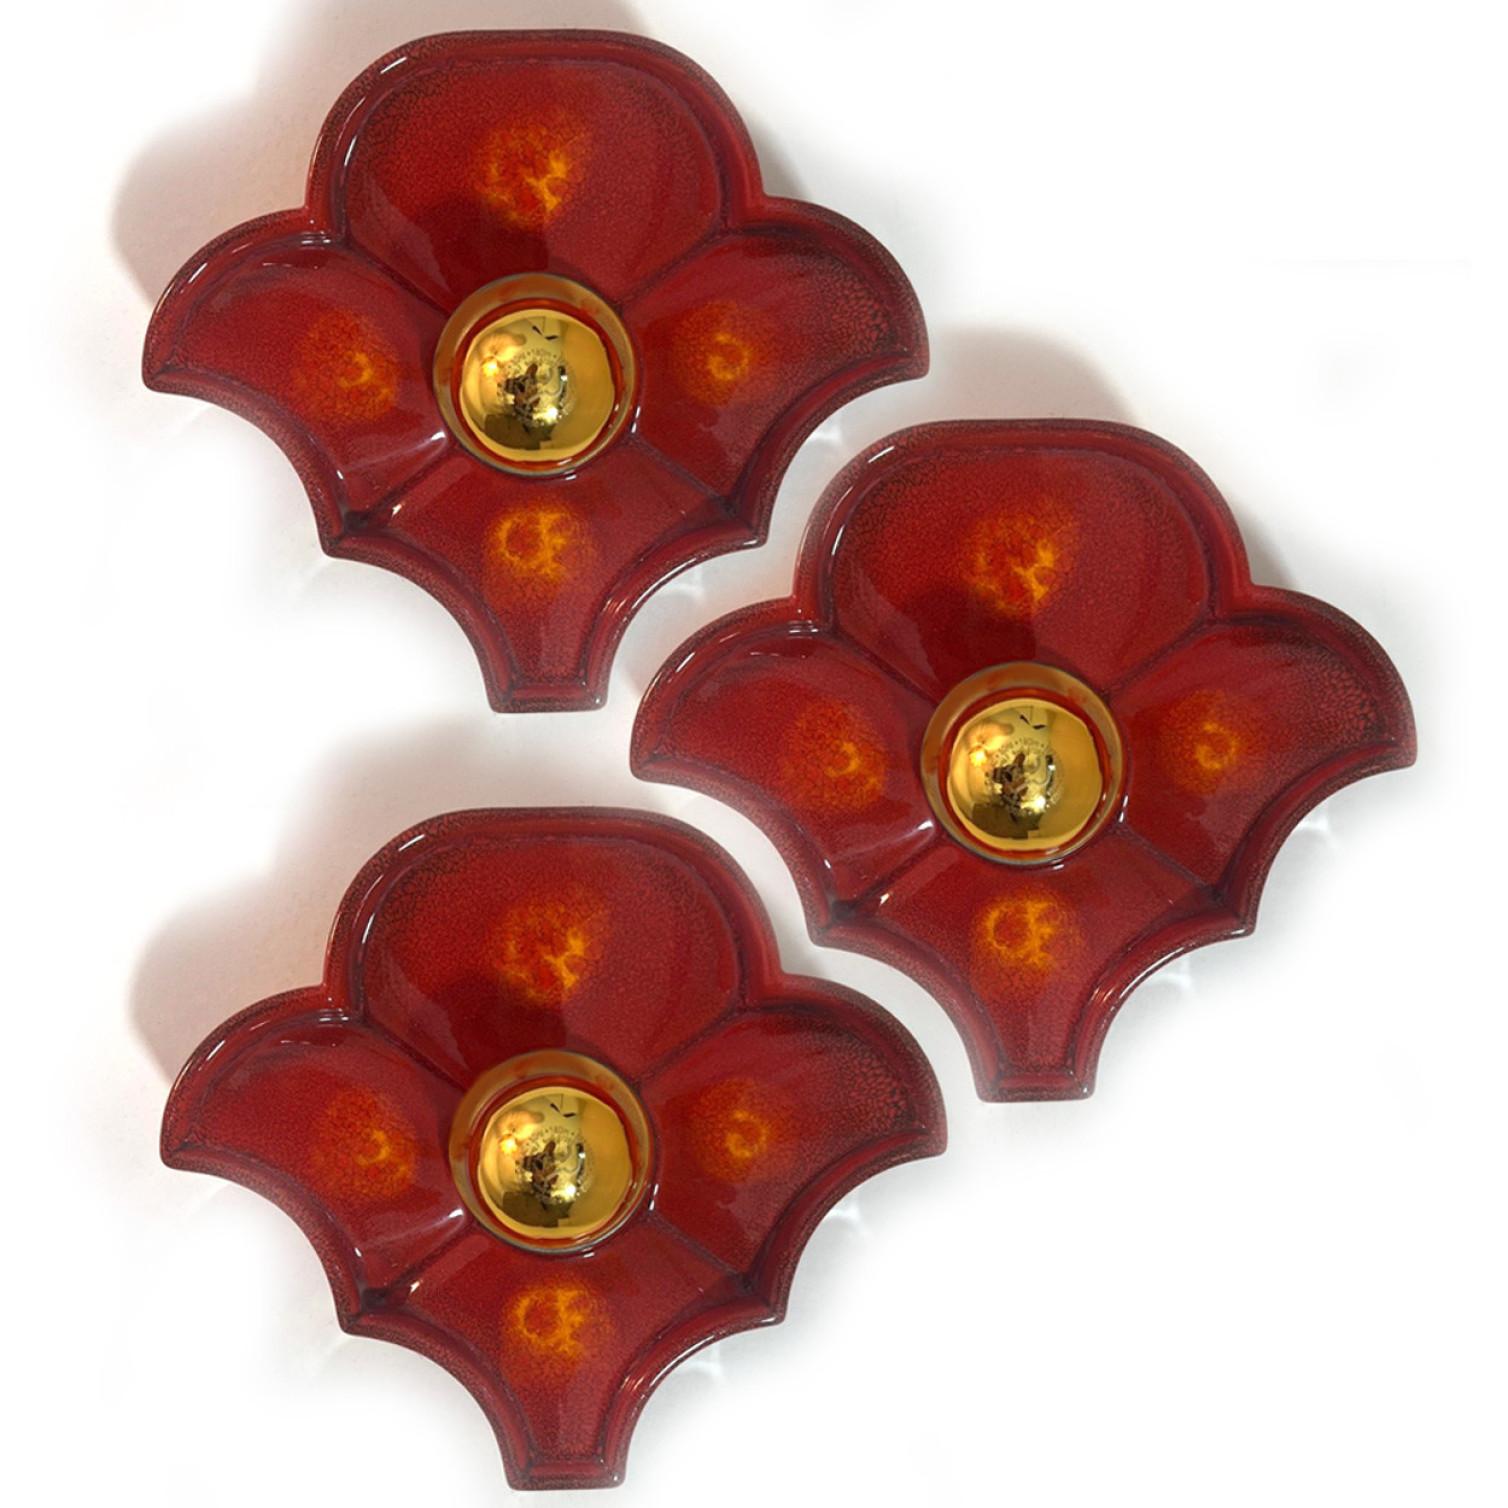 Several Flower Red Ceramic Wall Lights by Hustadt Keramik, Germany, 1970 For Sale 6